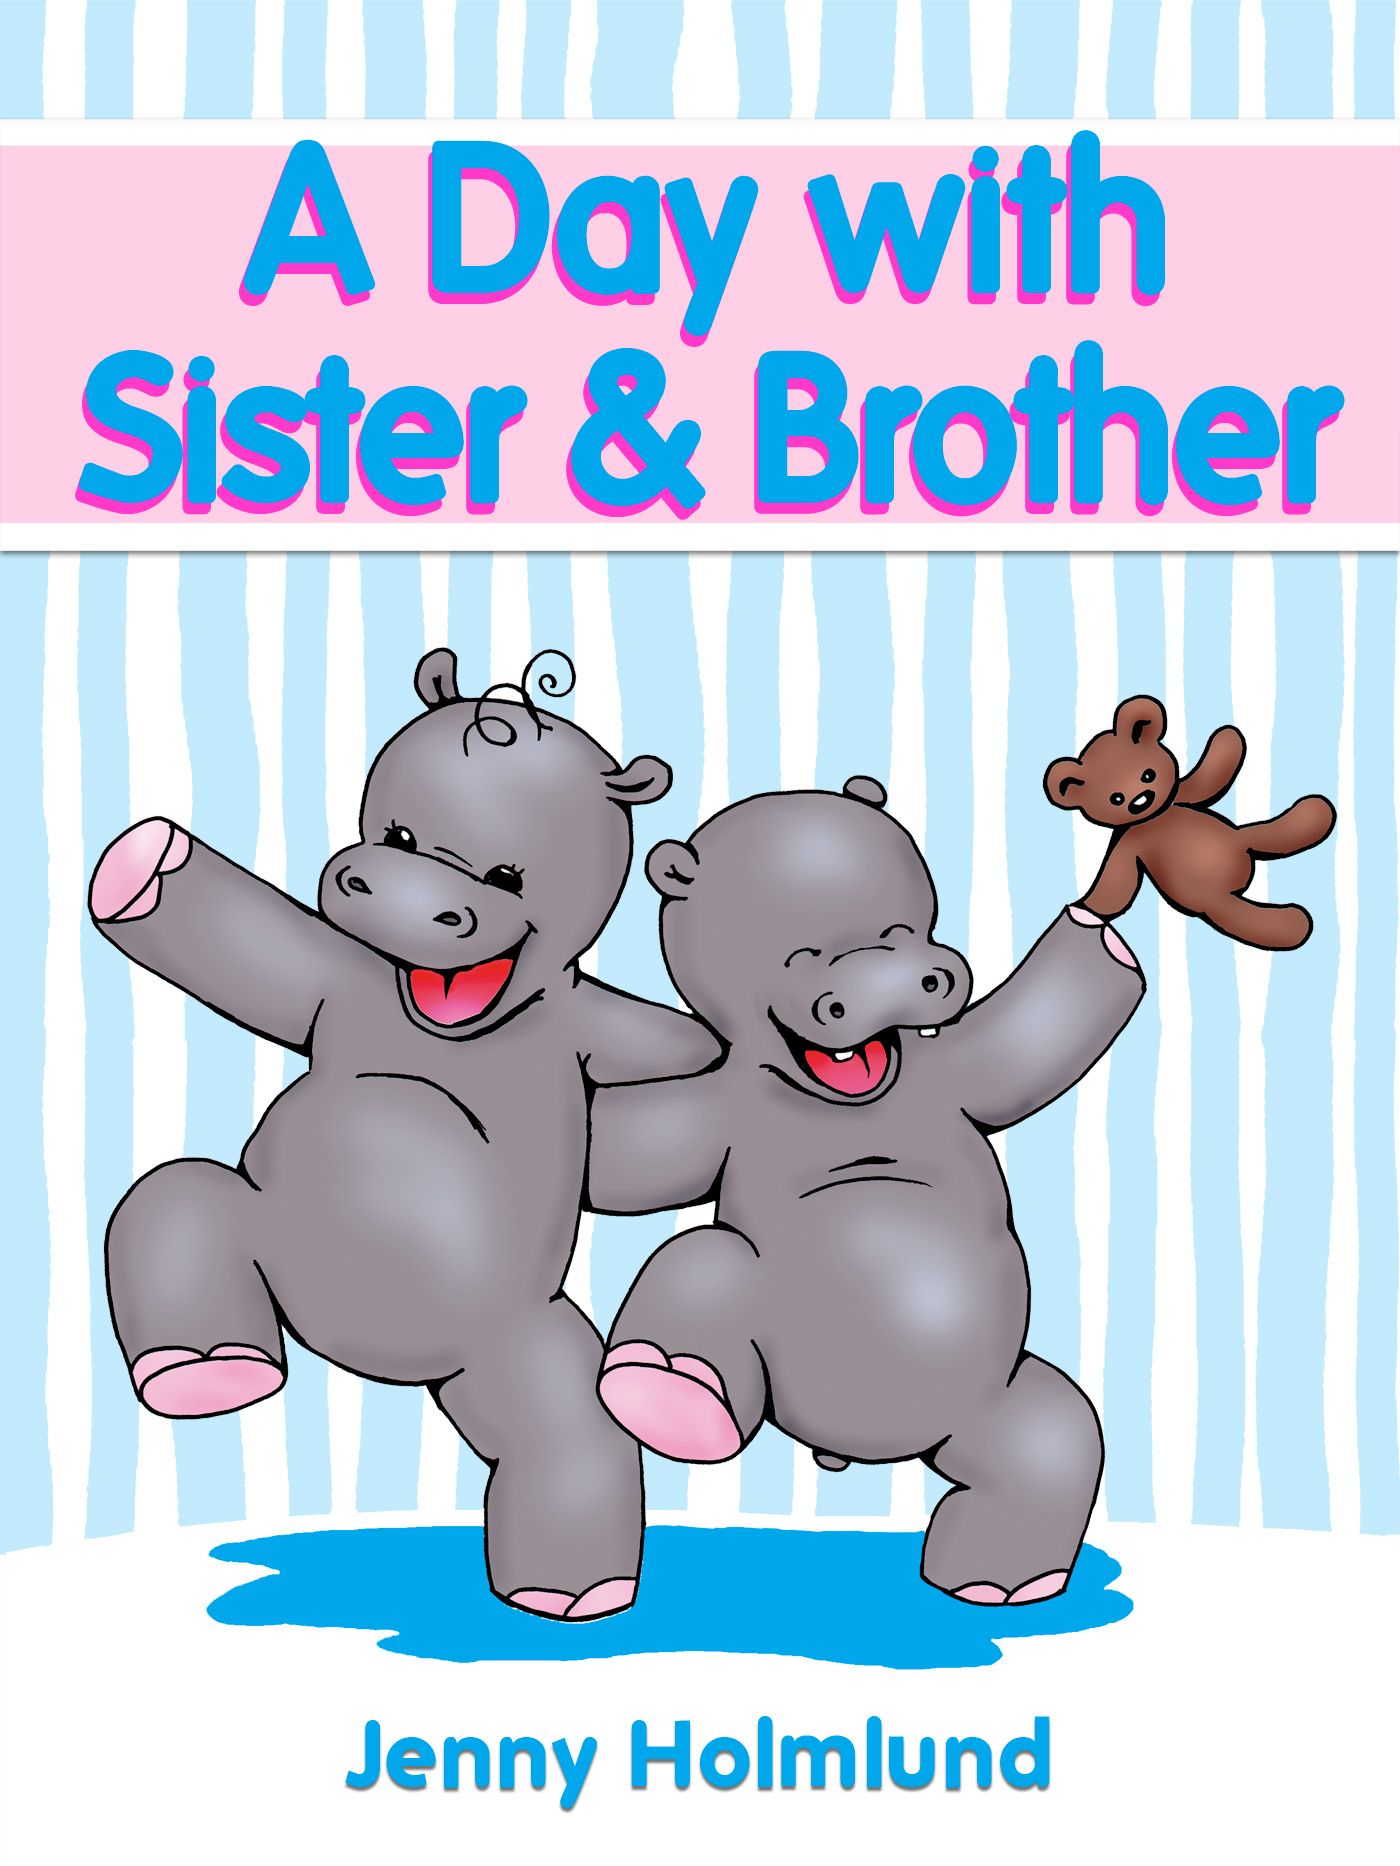 A Day with Sister & Brother, eBook by Jenny Holmlund